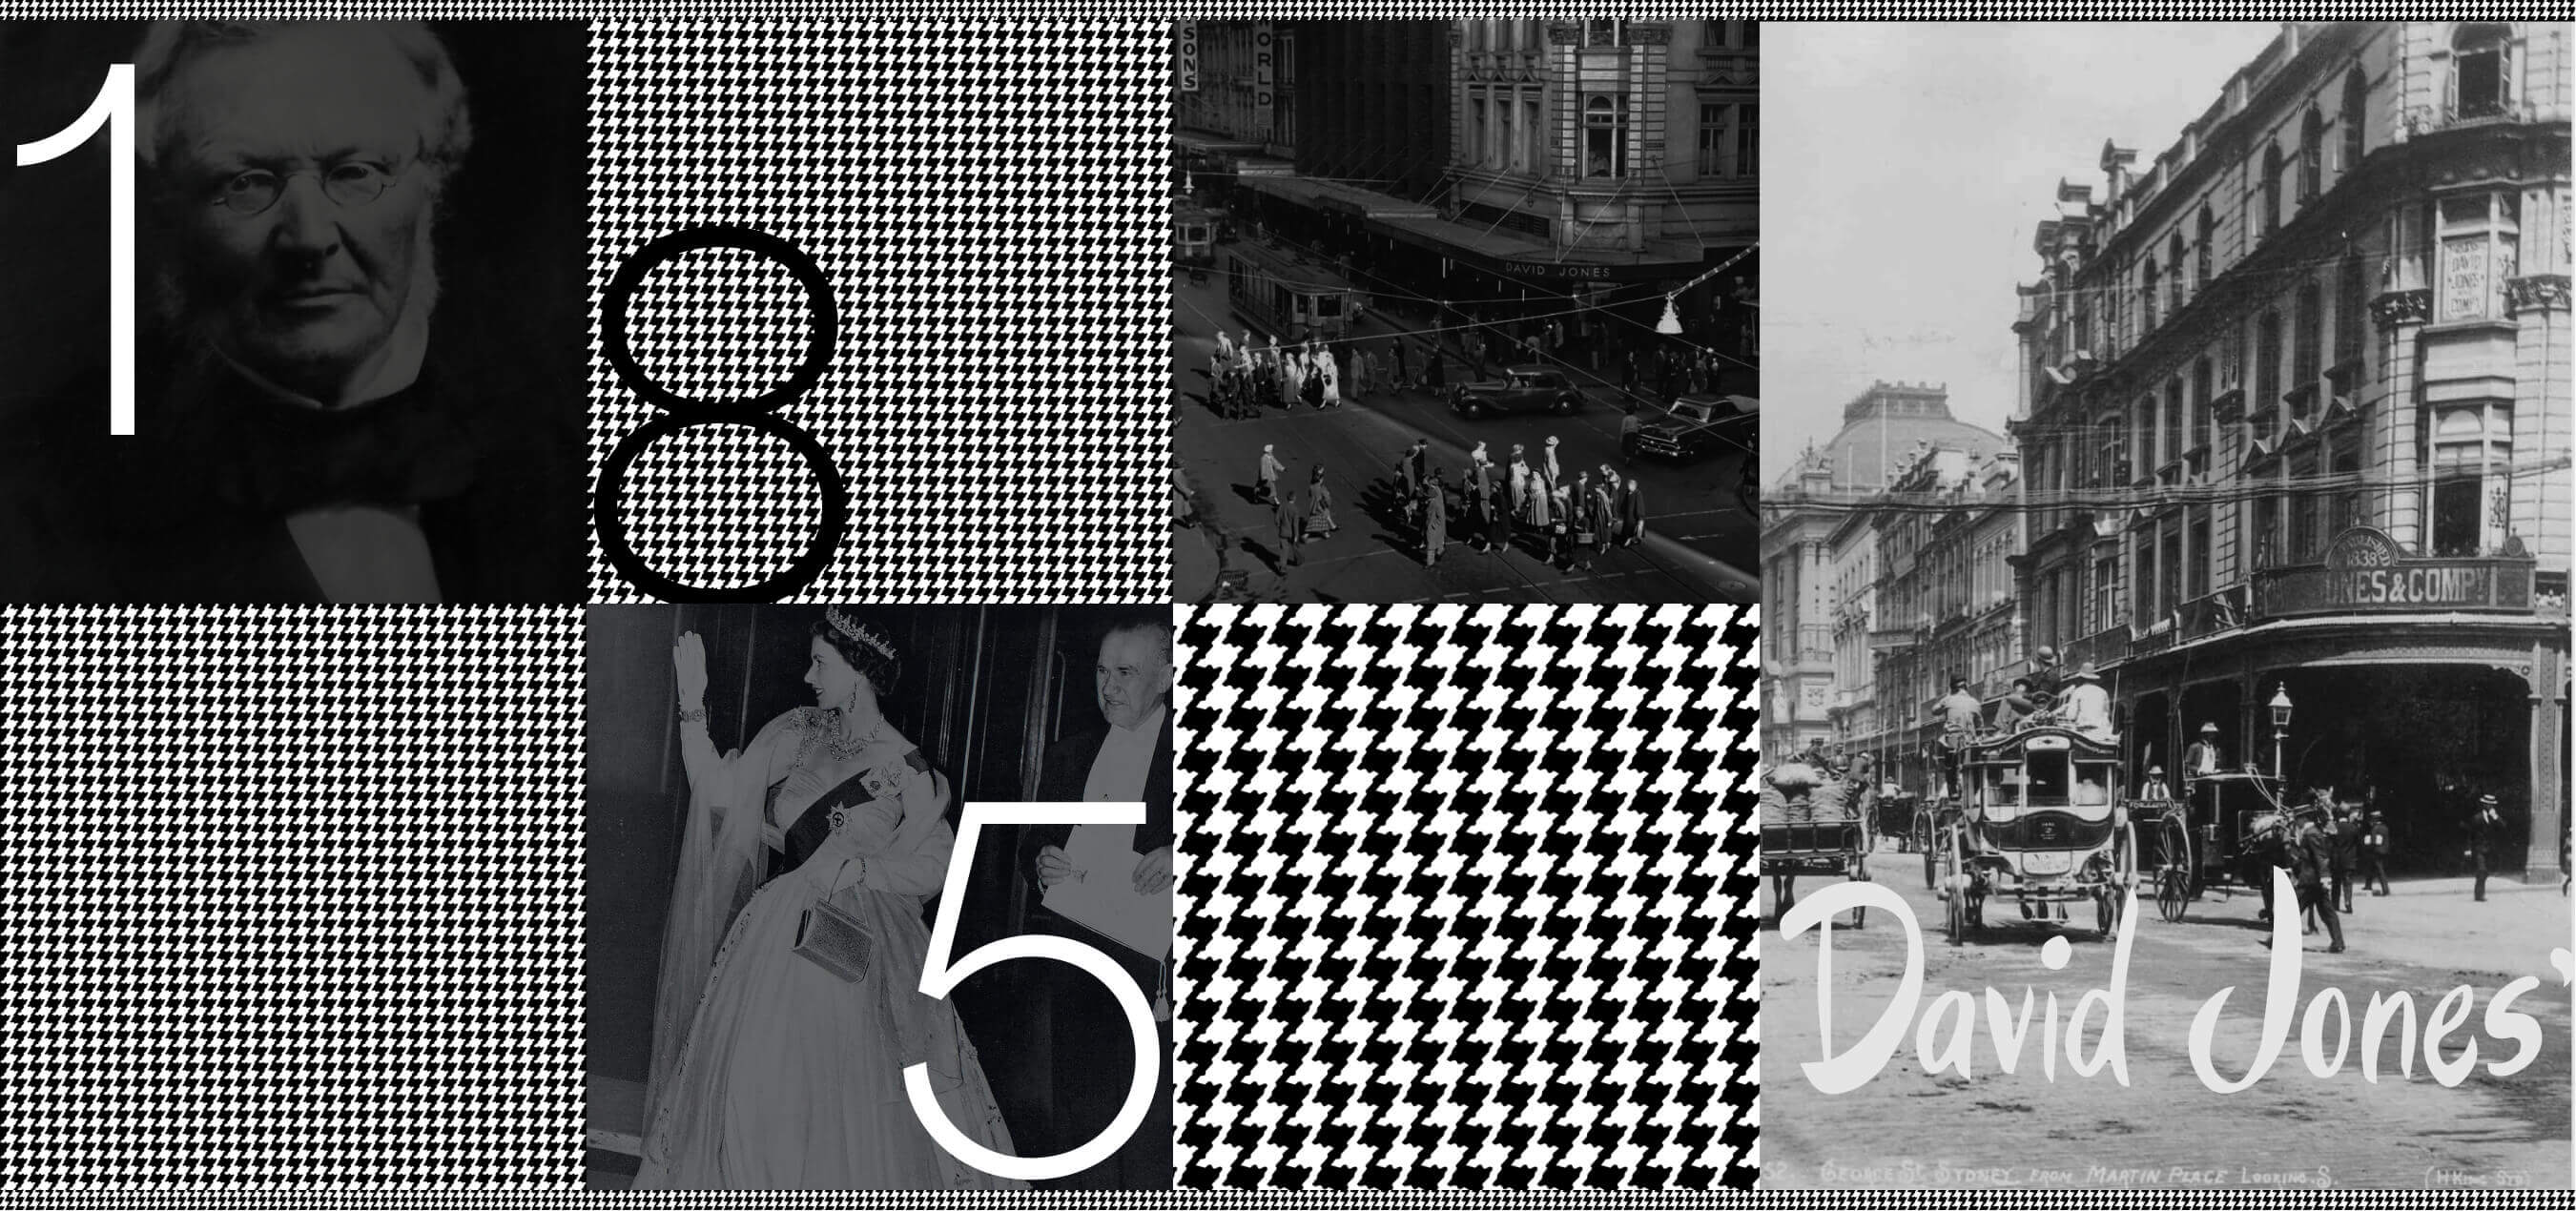 David Jones 180th anniversary: The birth of the famous houndstooth